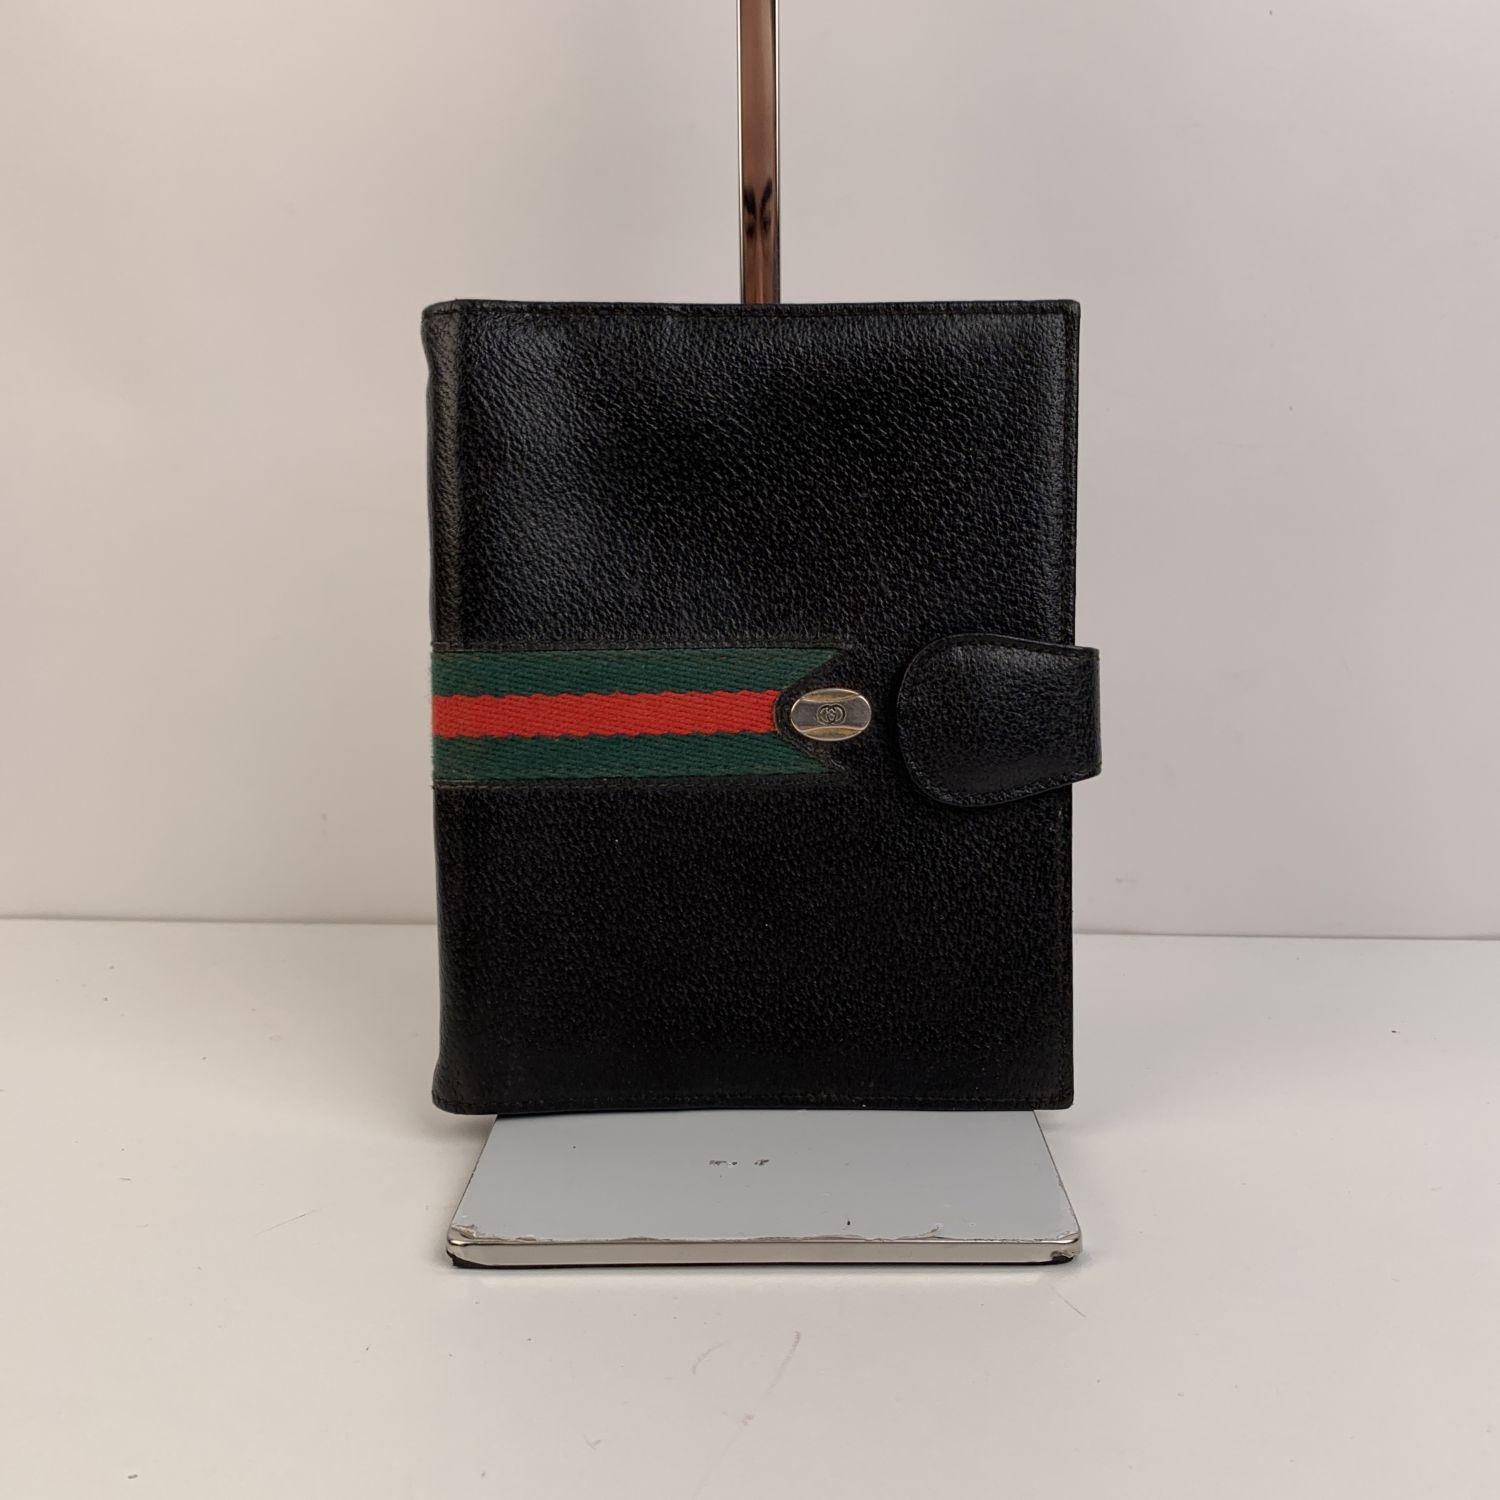 Elegant vintage agenda cover by GUCCI crafted in black leather. Striped detailing on the cover. It features a four ring binder inside and 6 side open slot inside. 'GUCCI Accessory collection - made in Italy' embossed inside. Measurements: 7.5 x 6